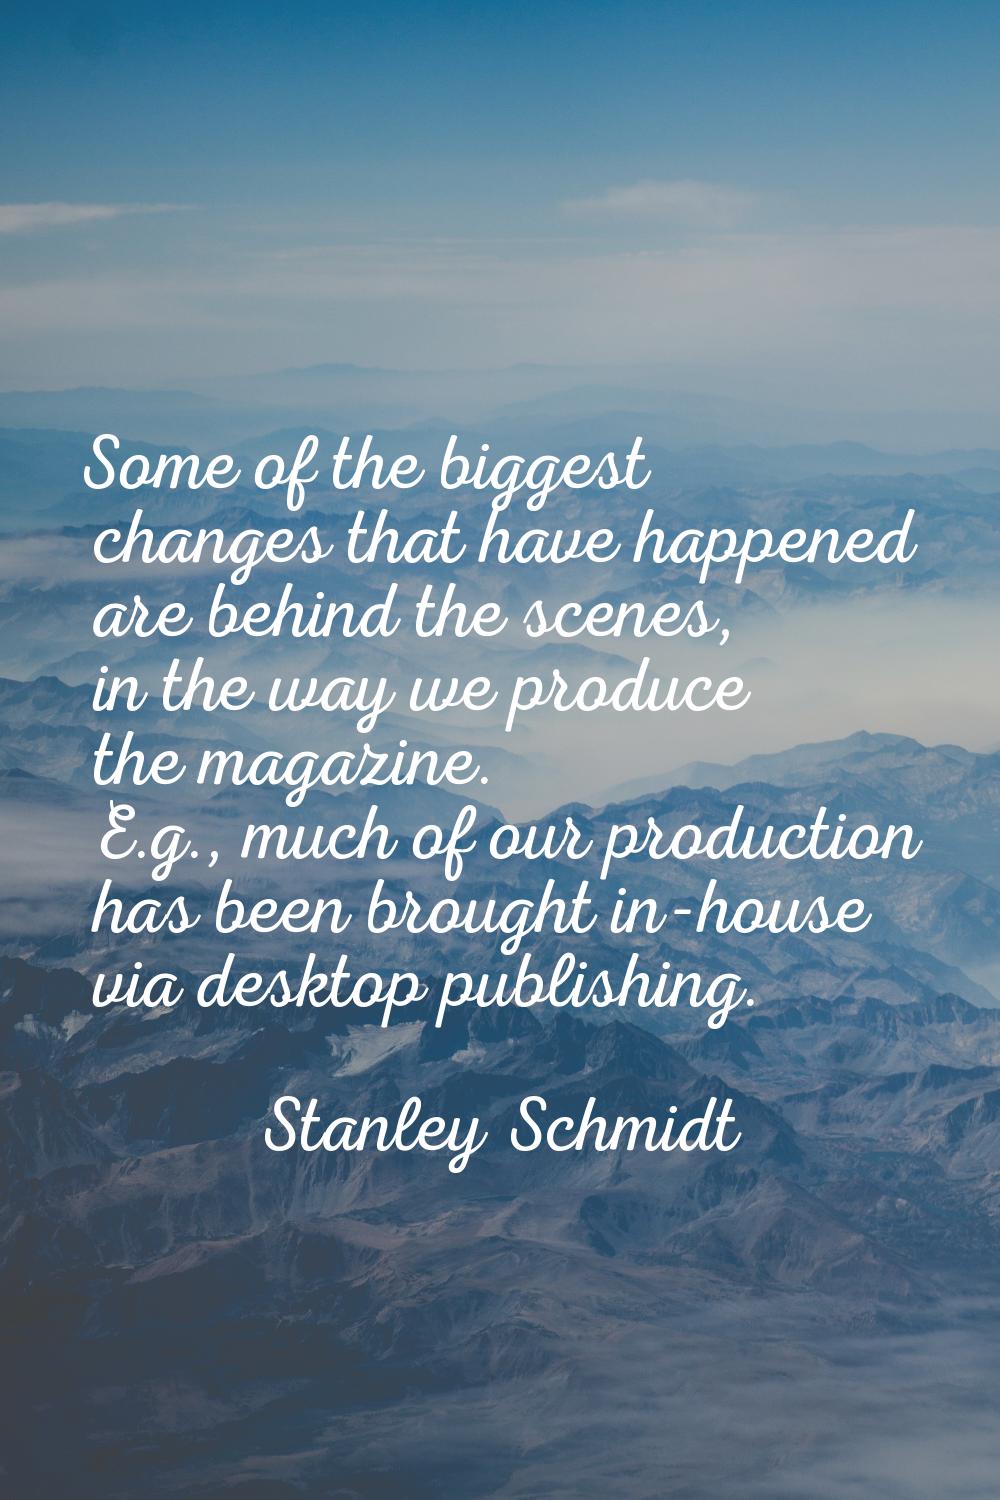 Some of the biggest changes that have happened are behind the scenes, in the way we produce the mag